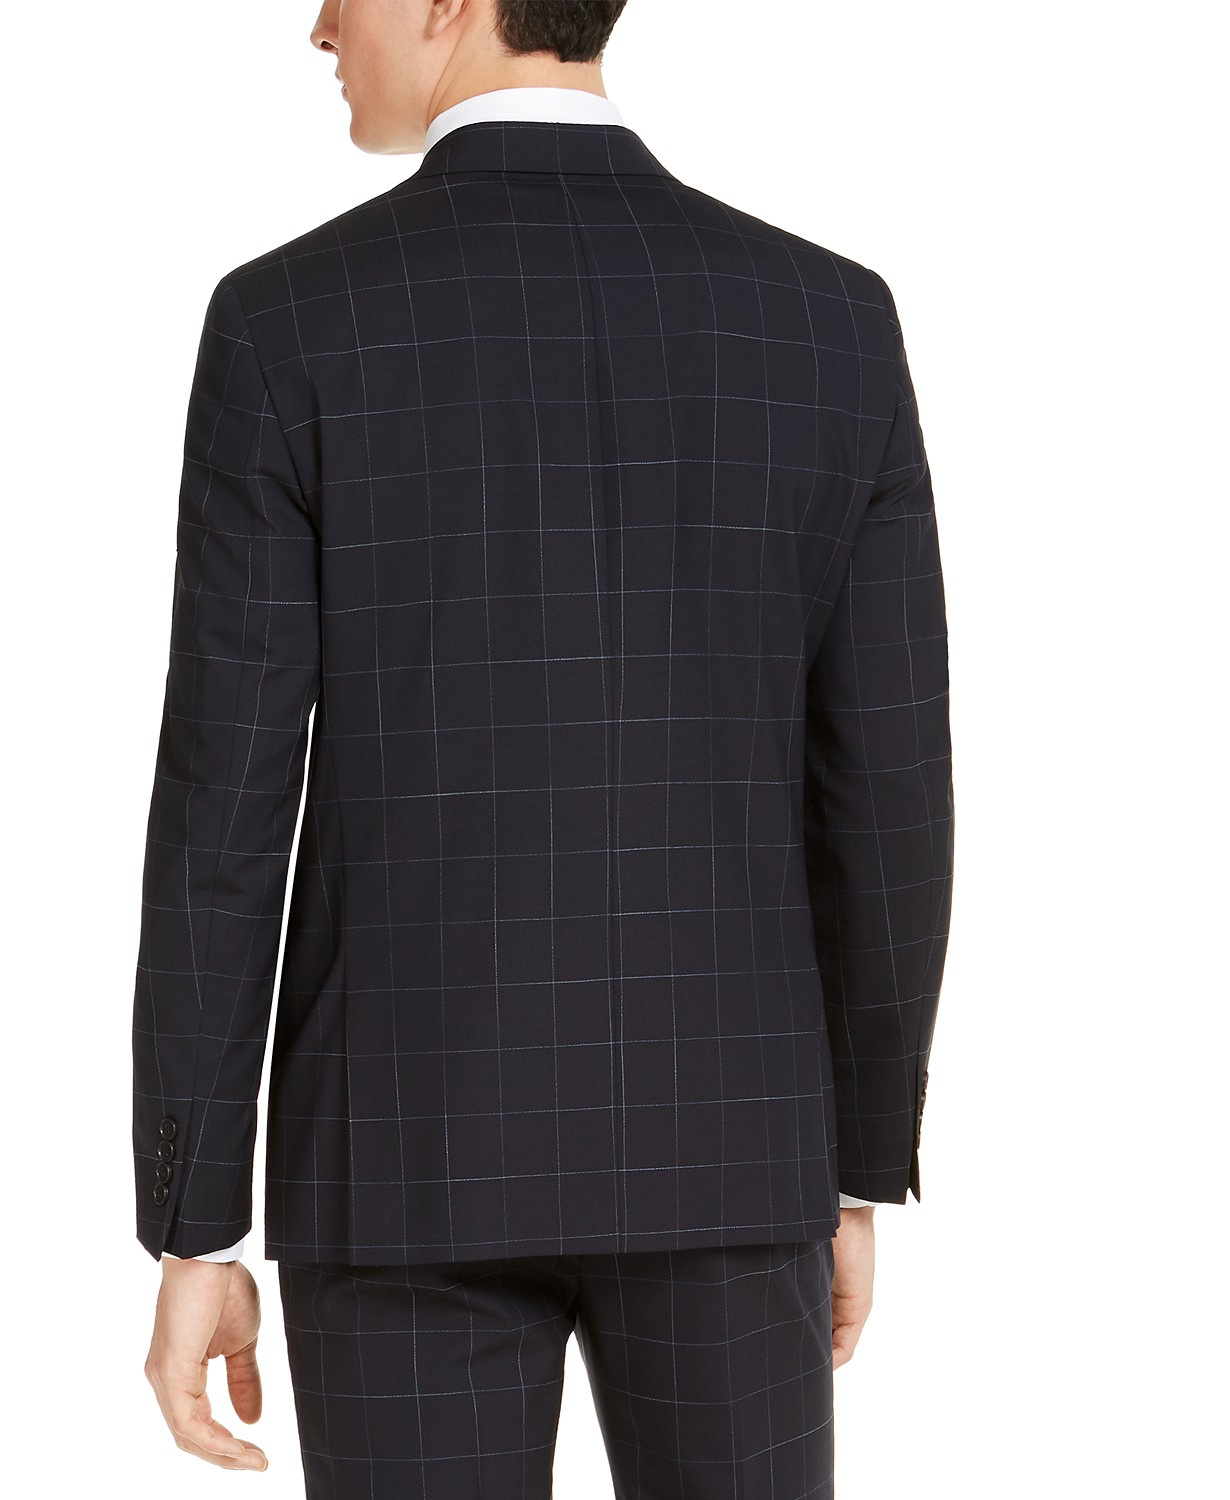 www.couturepoint.com-calvin-klein-mens-blue-wool-blend-windowpane-extra-slim-fit-infinite-stretch-suit-jacket